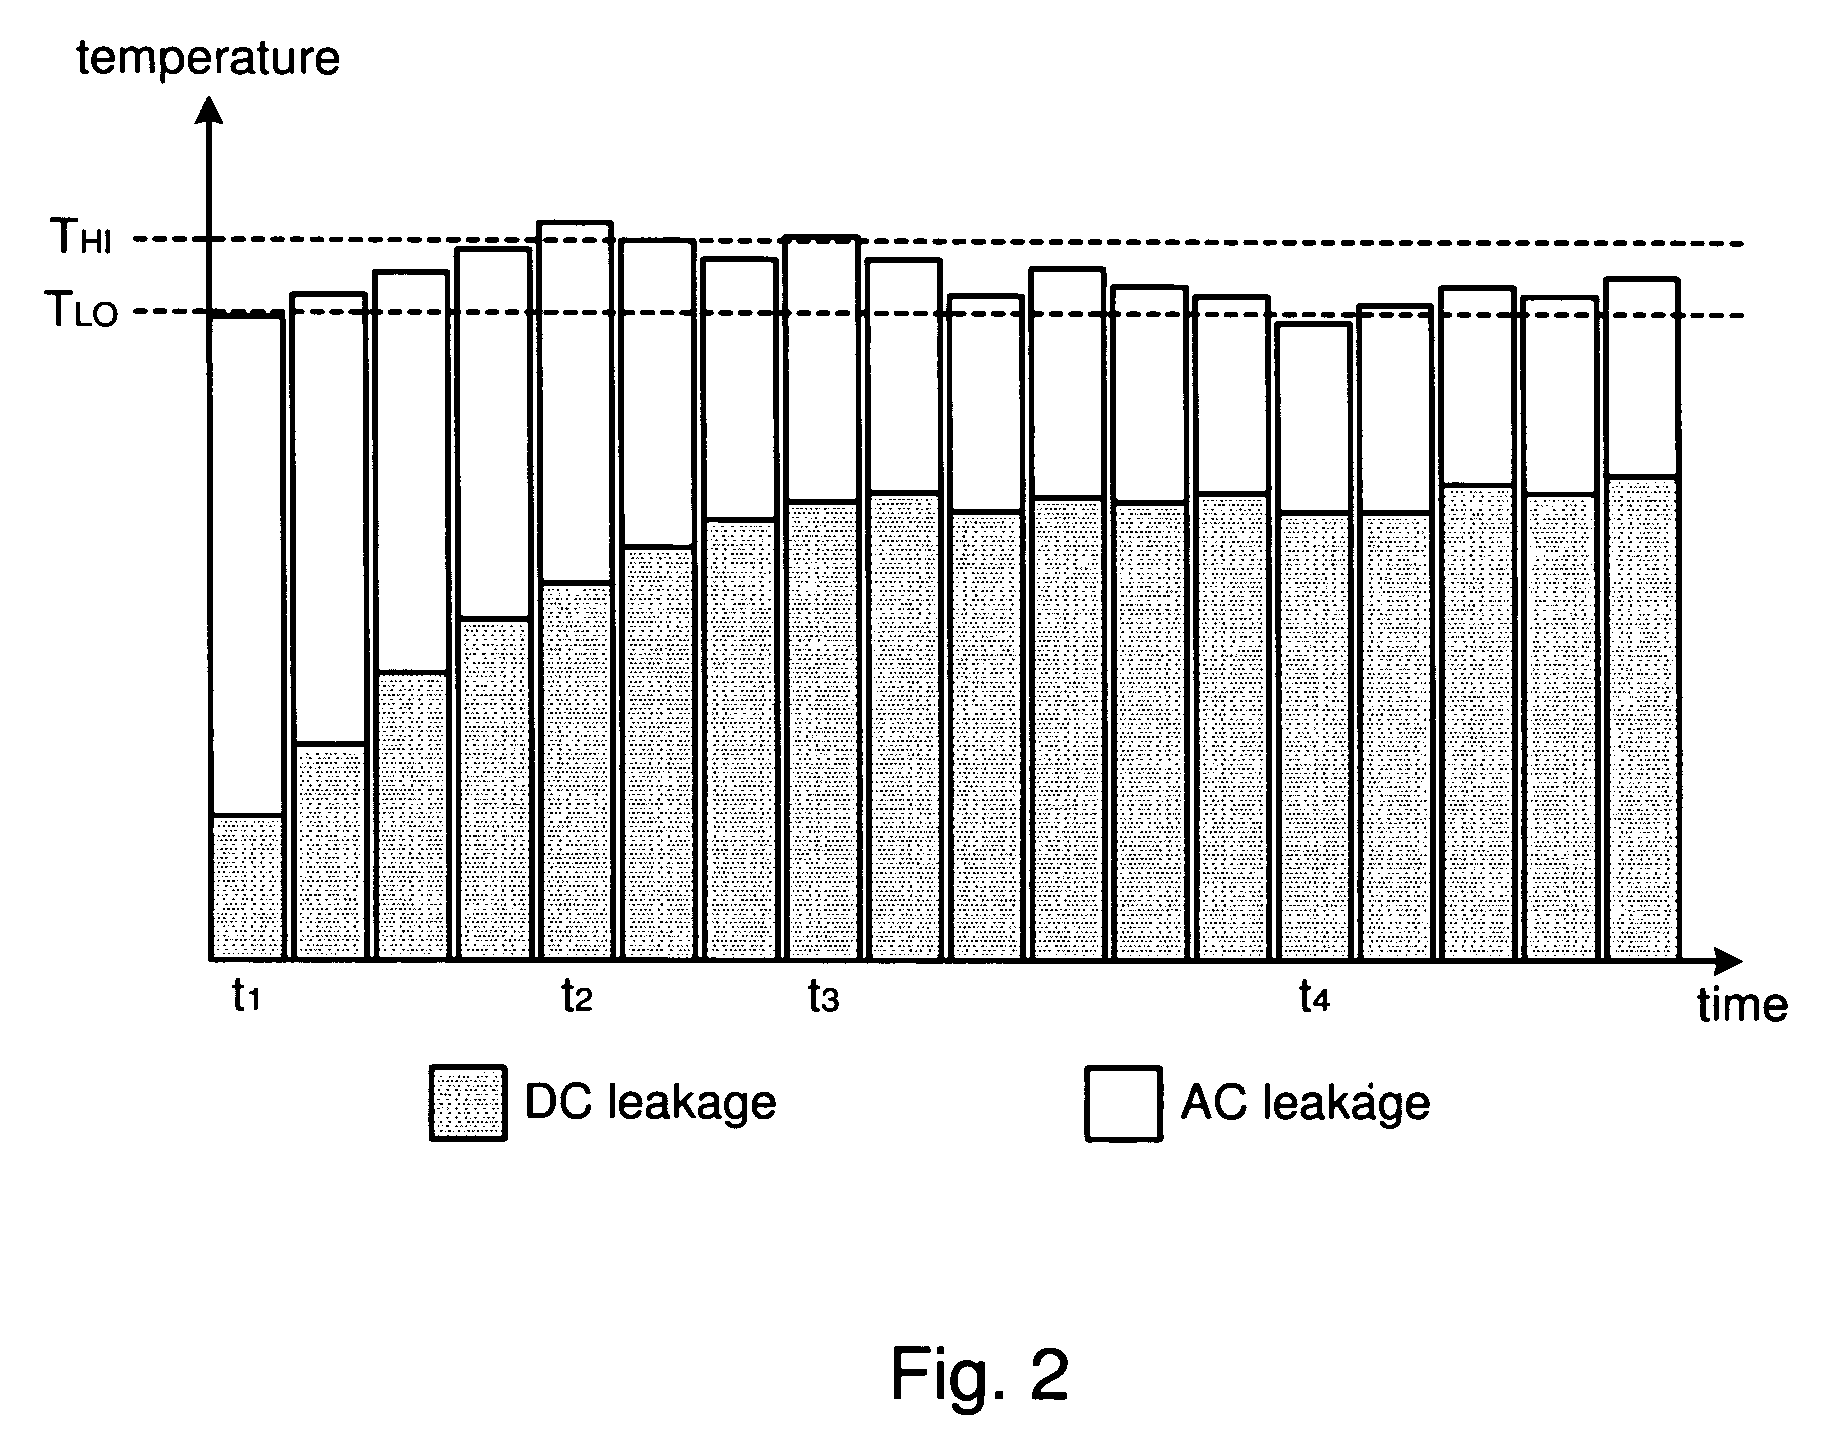 System and method for burn-in test control